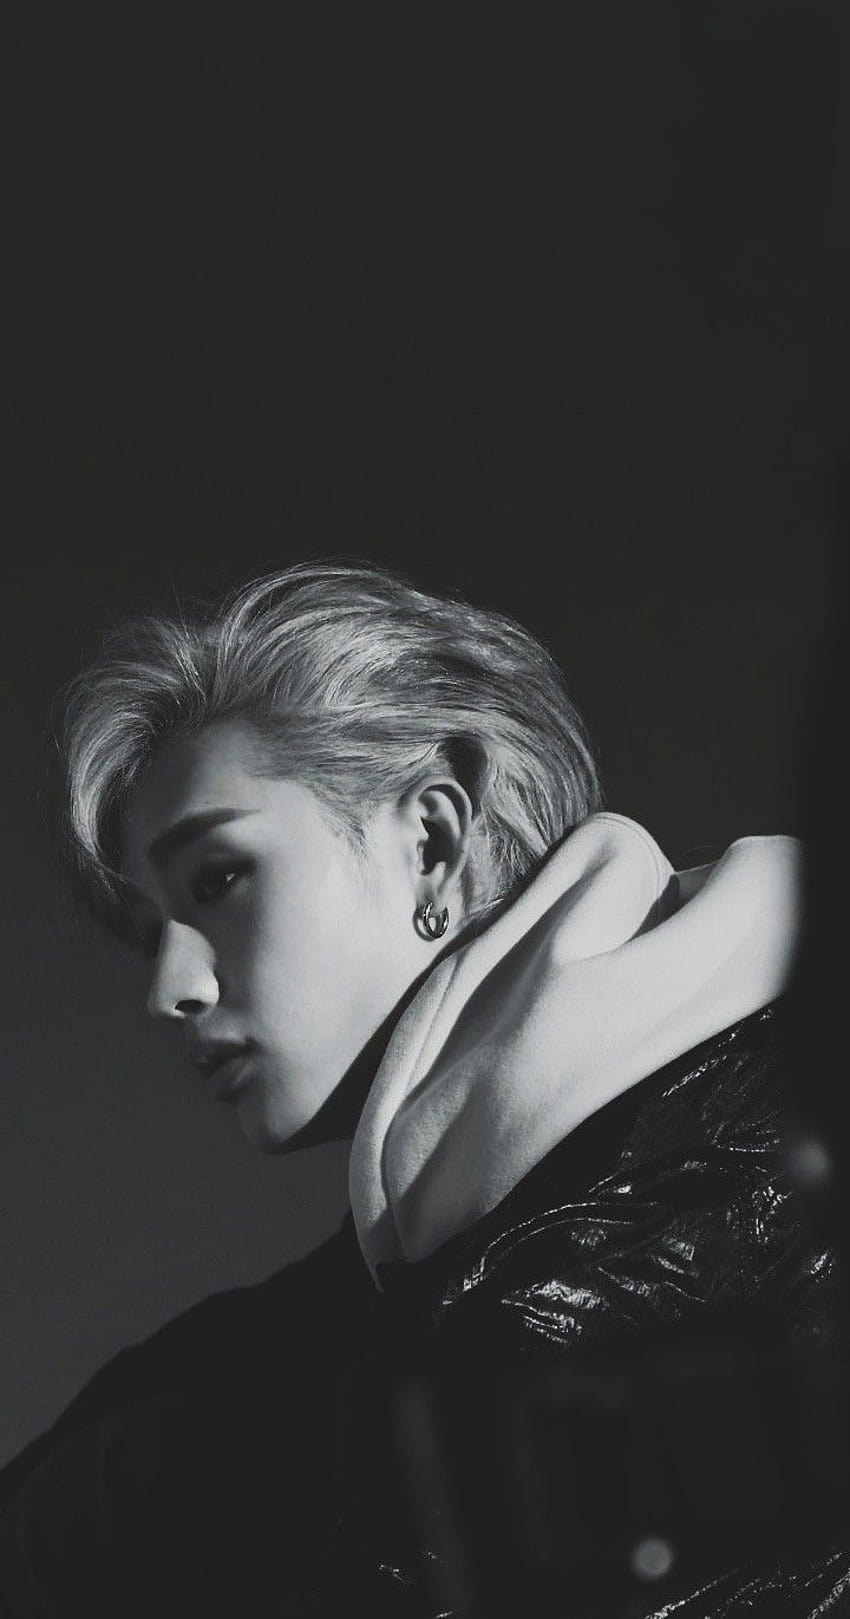 Black and white image of a male model with blonde hair and piercings wearing a black shirt - Bang Chan